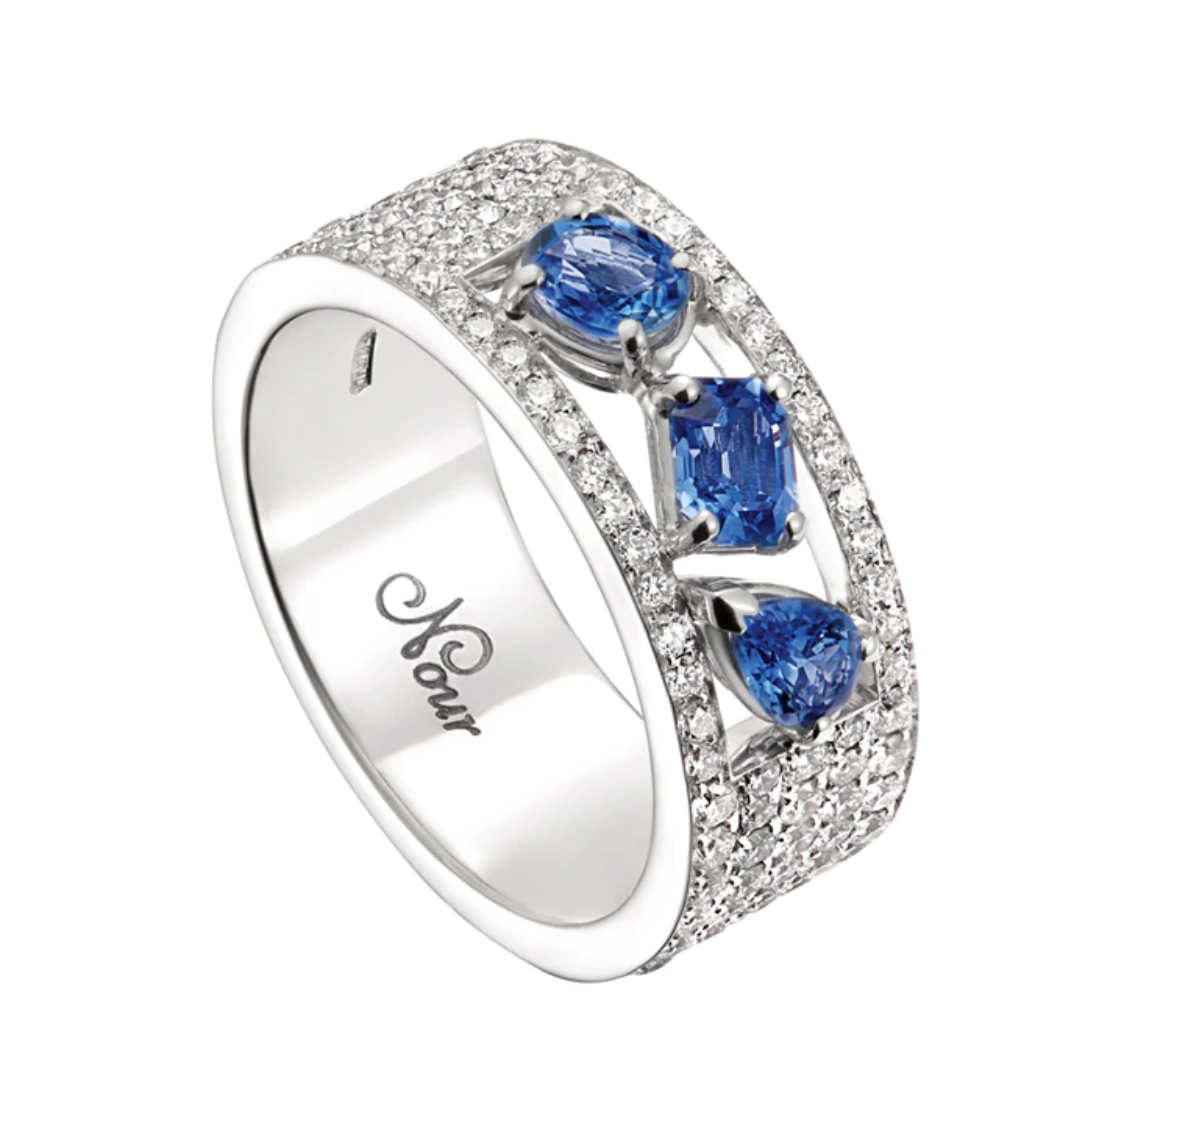 something-blue-jewellery-pieces-for-your-wedding-day-nour-by-jahan